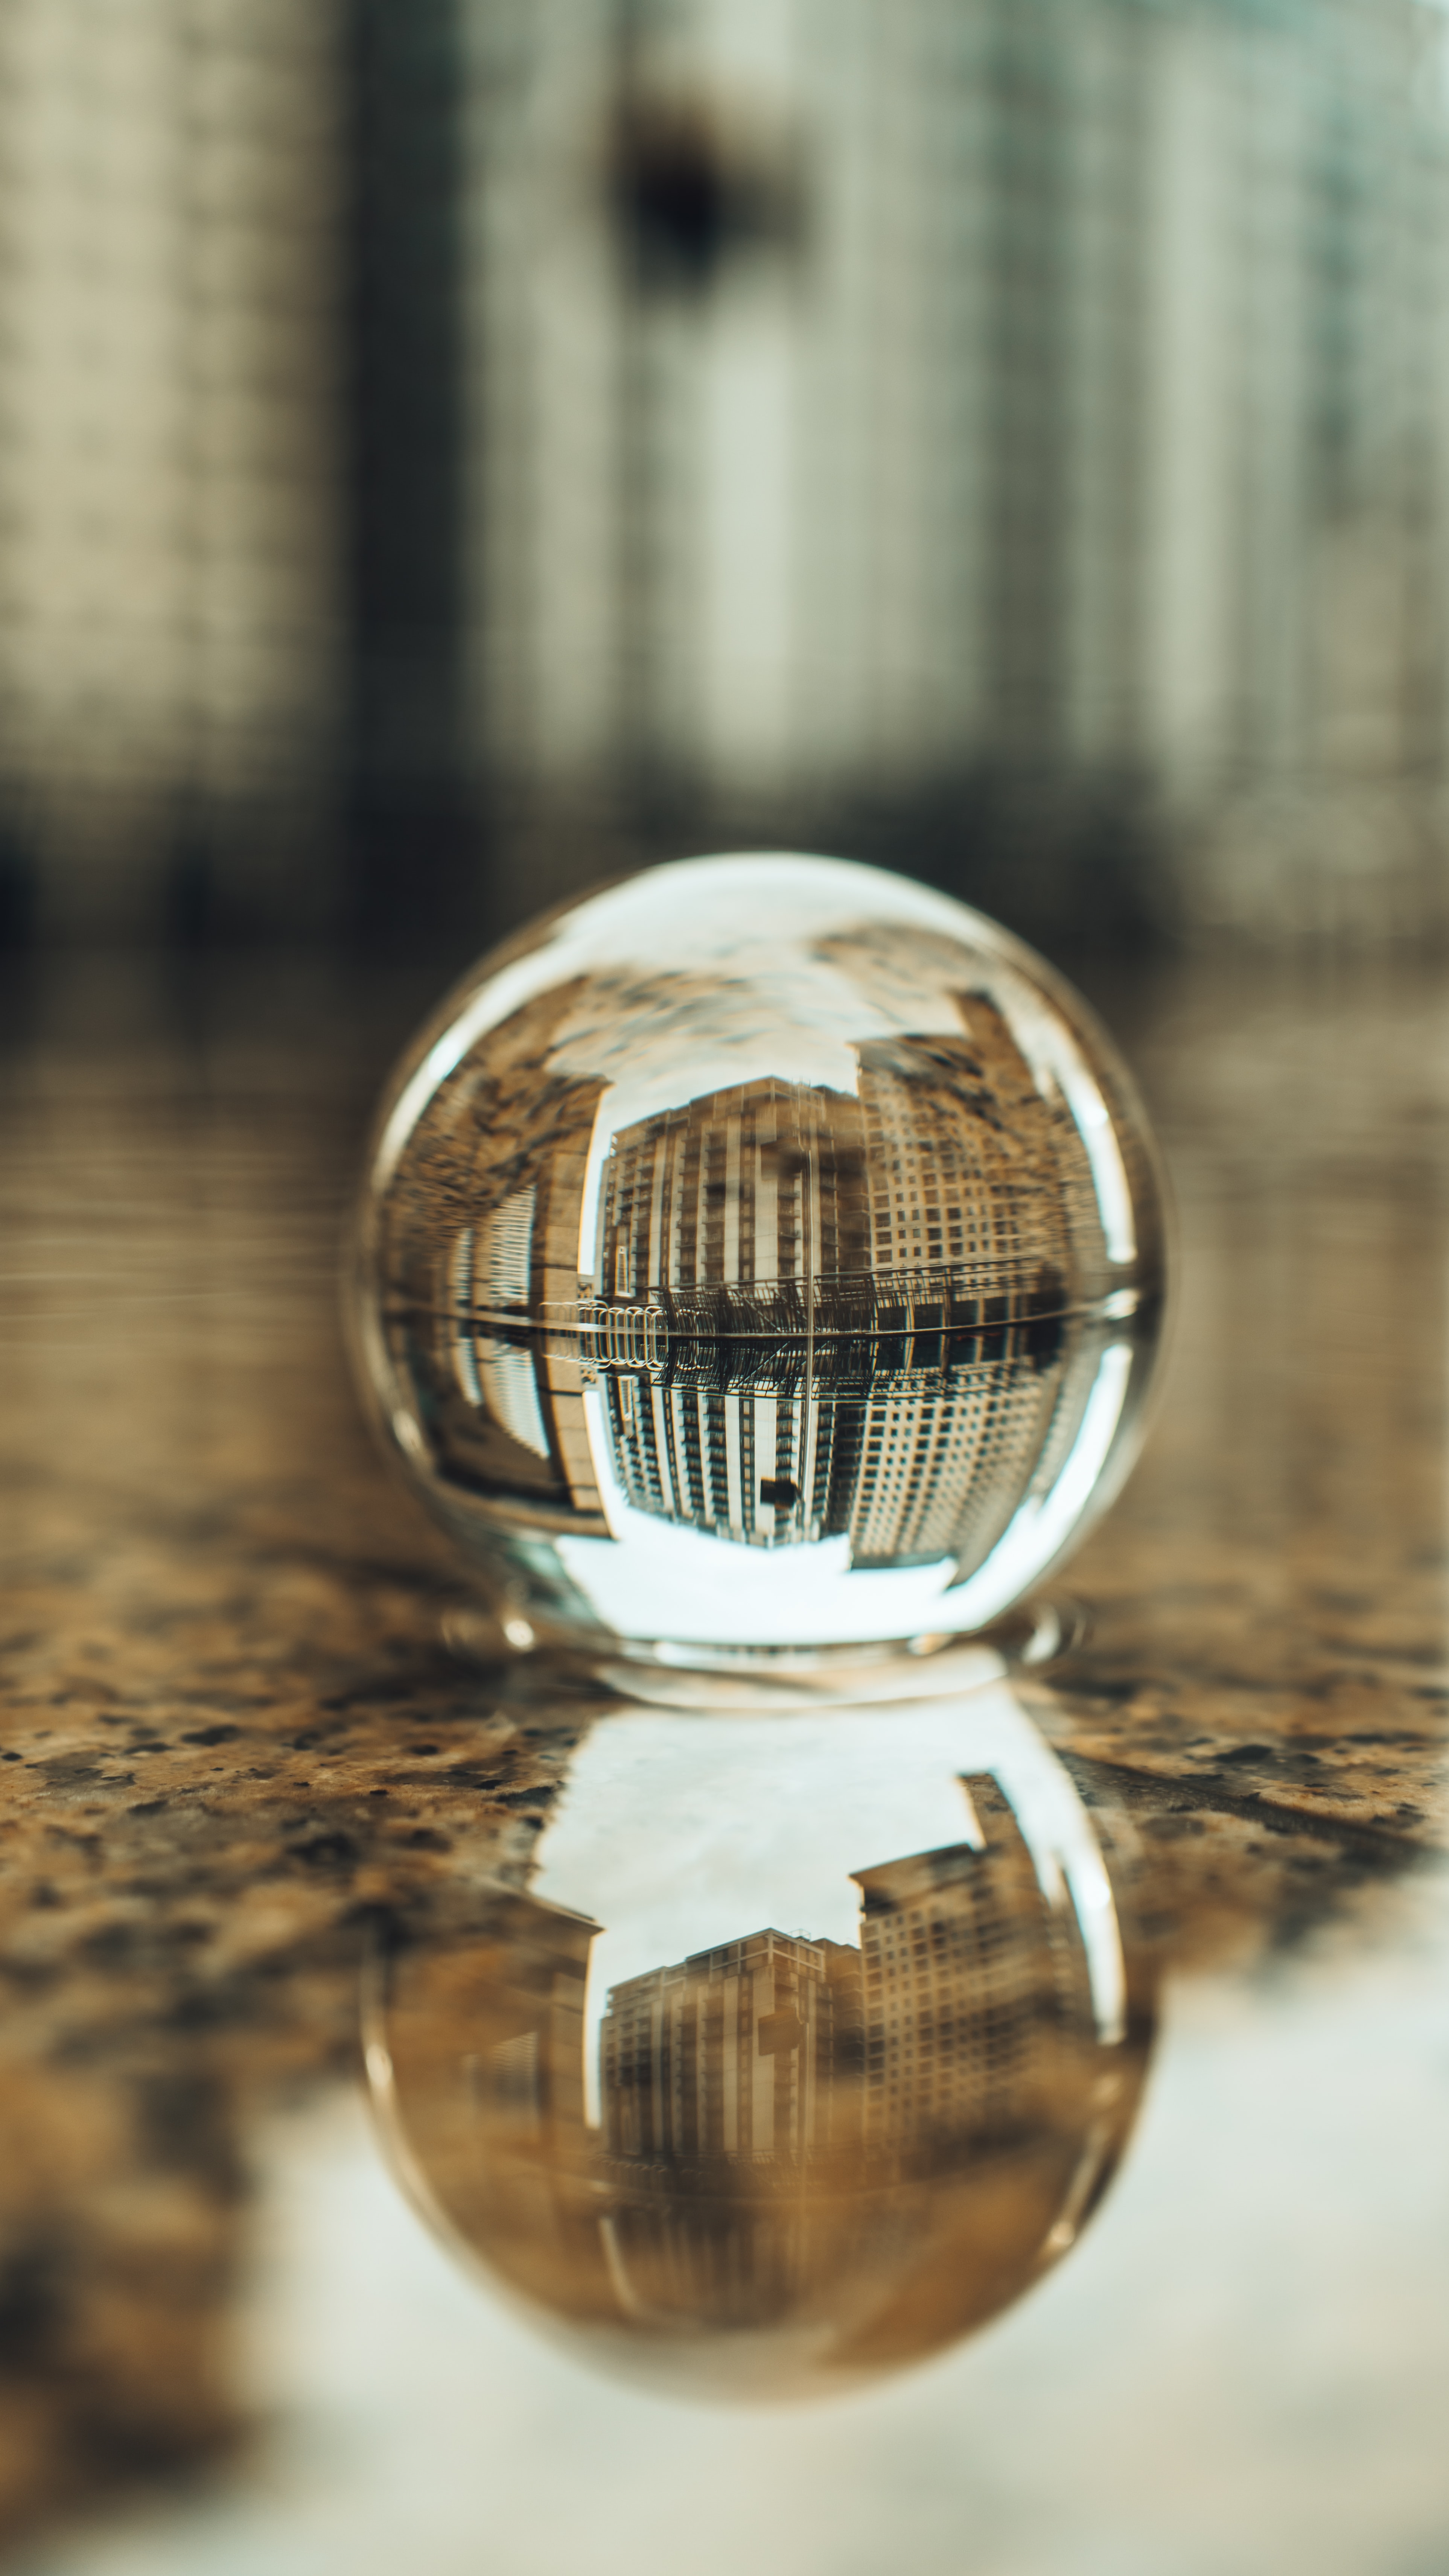 crystal ball, ball, water, building, reflection, miscellanea, miscellaneous phone background